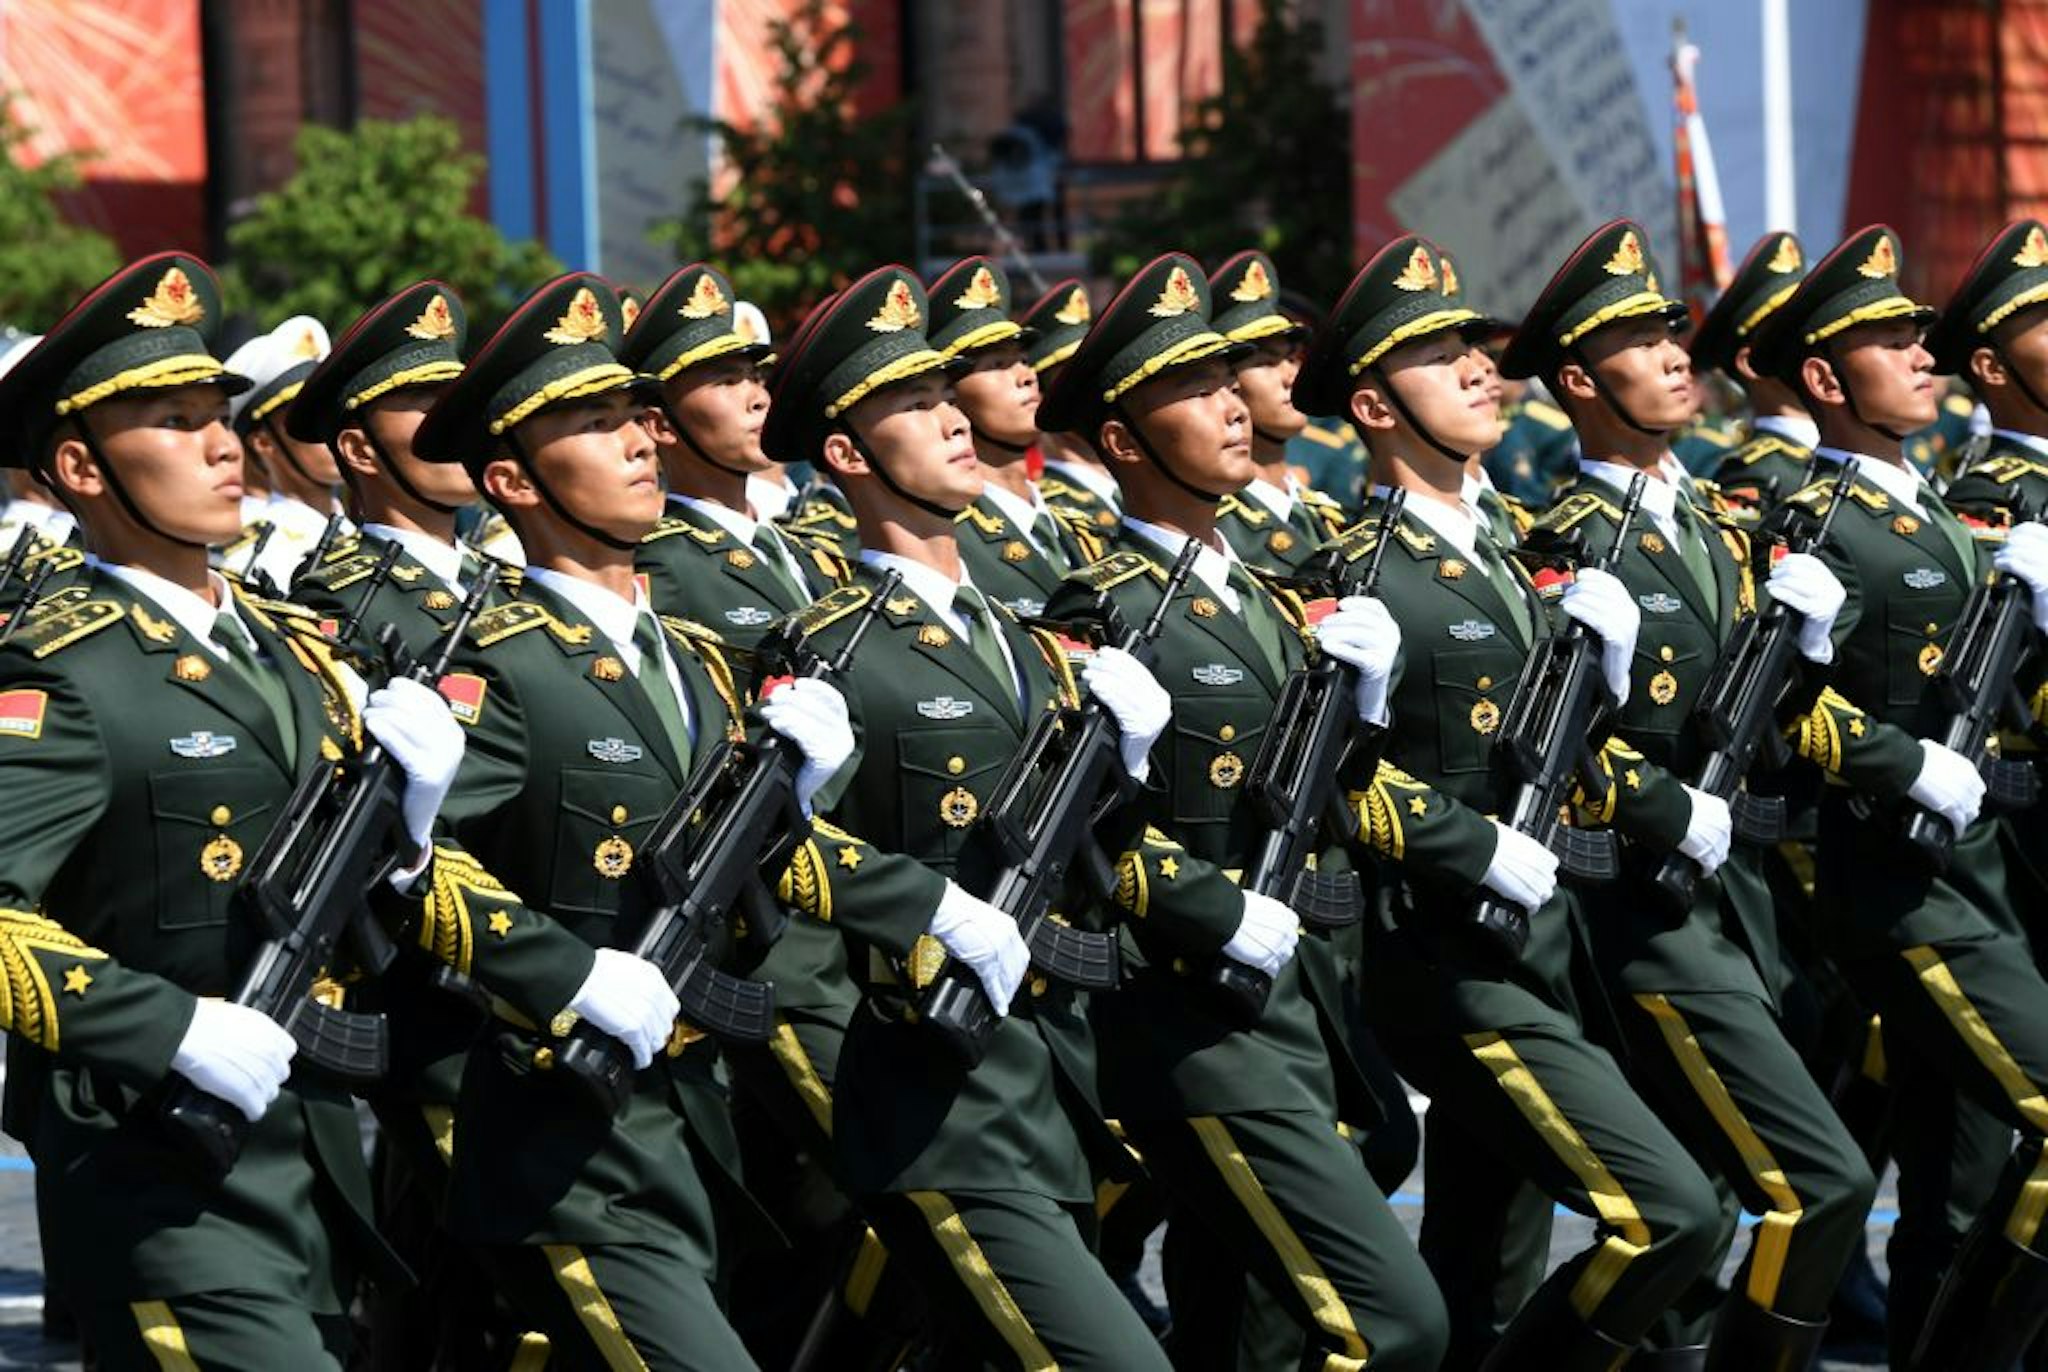 MOSCOW, RUSSIA - JUNE 24: A parade unit of the Chinese Armed Forces during the Victory Day military parade in Red Square marking the 75th anniversary of the victory in World War II, on June 24, 2020 in Moscow, Russia. The 75th-anniversary marks the end of the Great Patriotic War when the Nazi's capitulated to the then Soviet Union. (